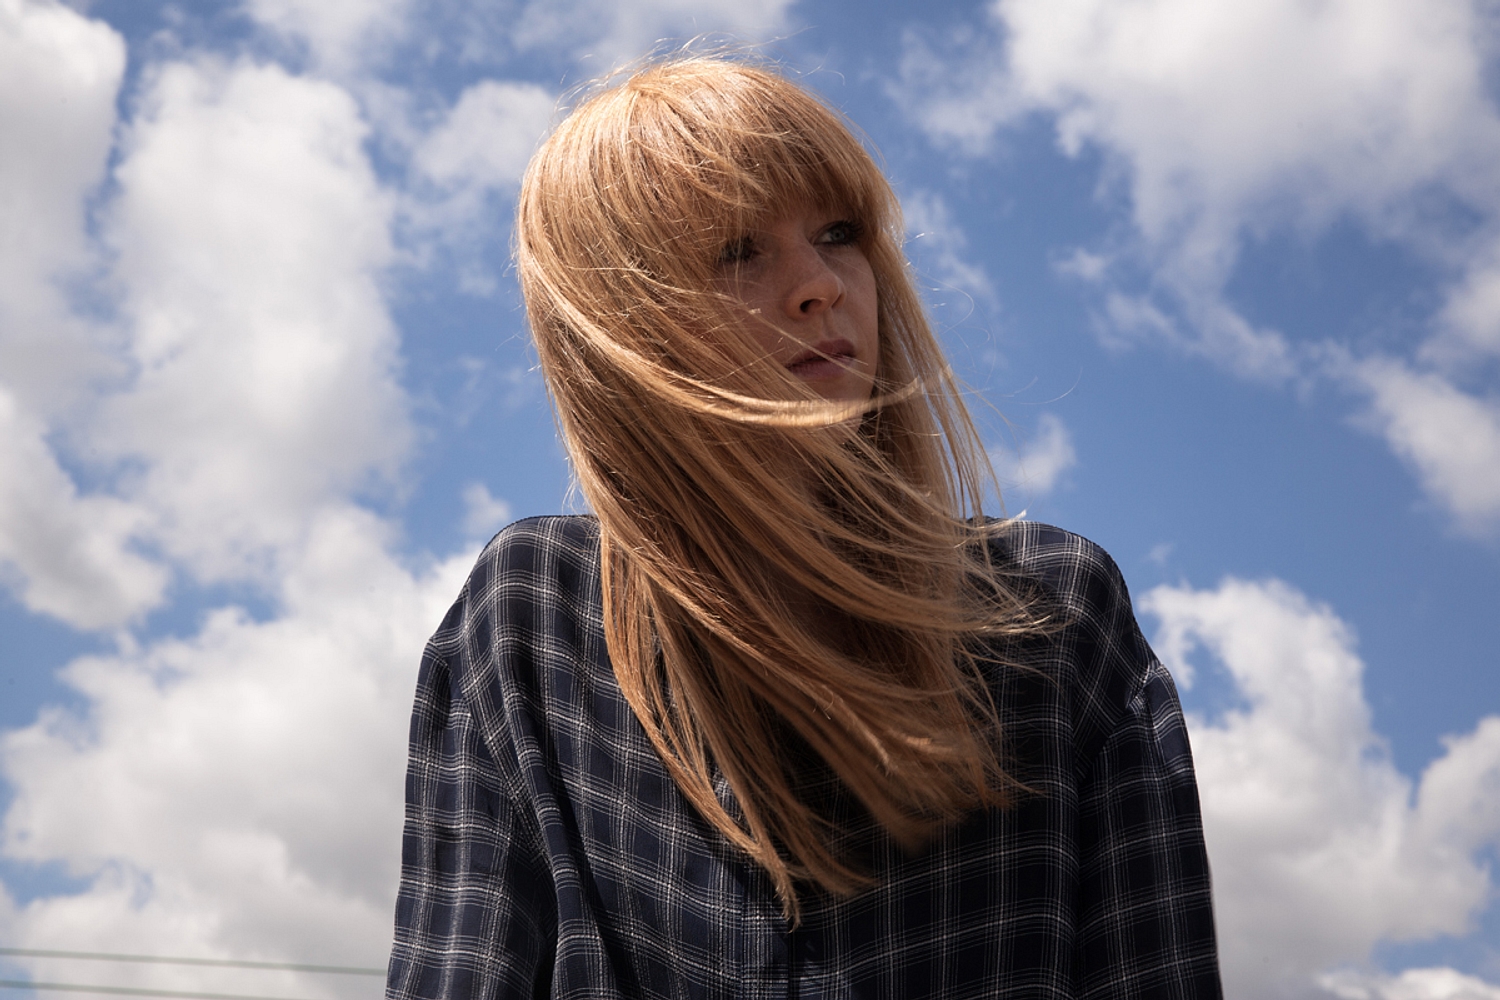 Lucy Rose: "I just wanna keep going forwards, even if it's only a tiny step"